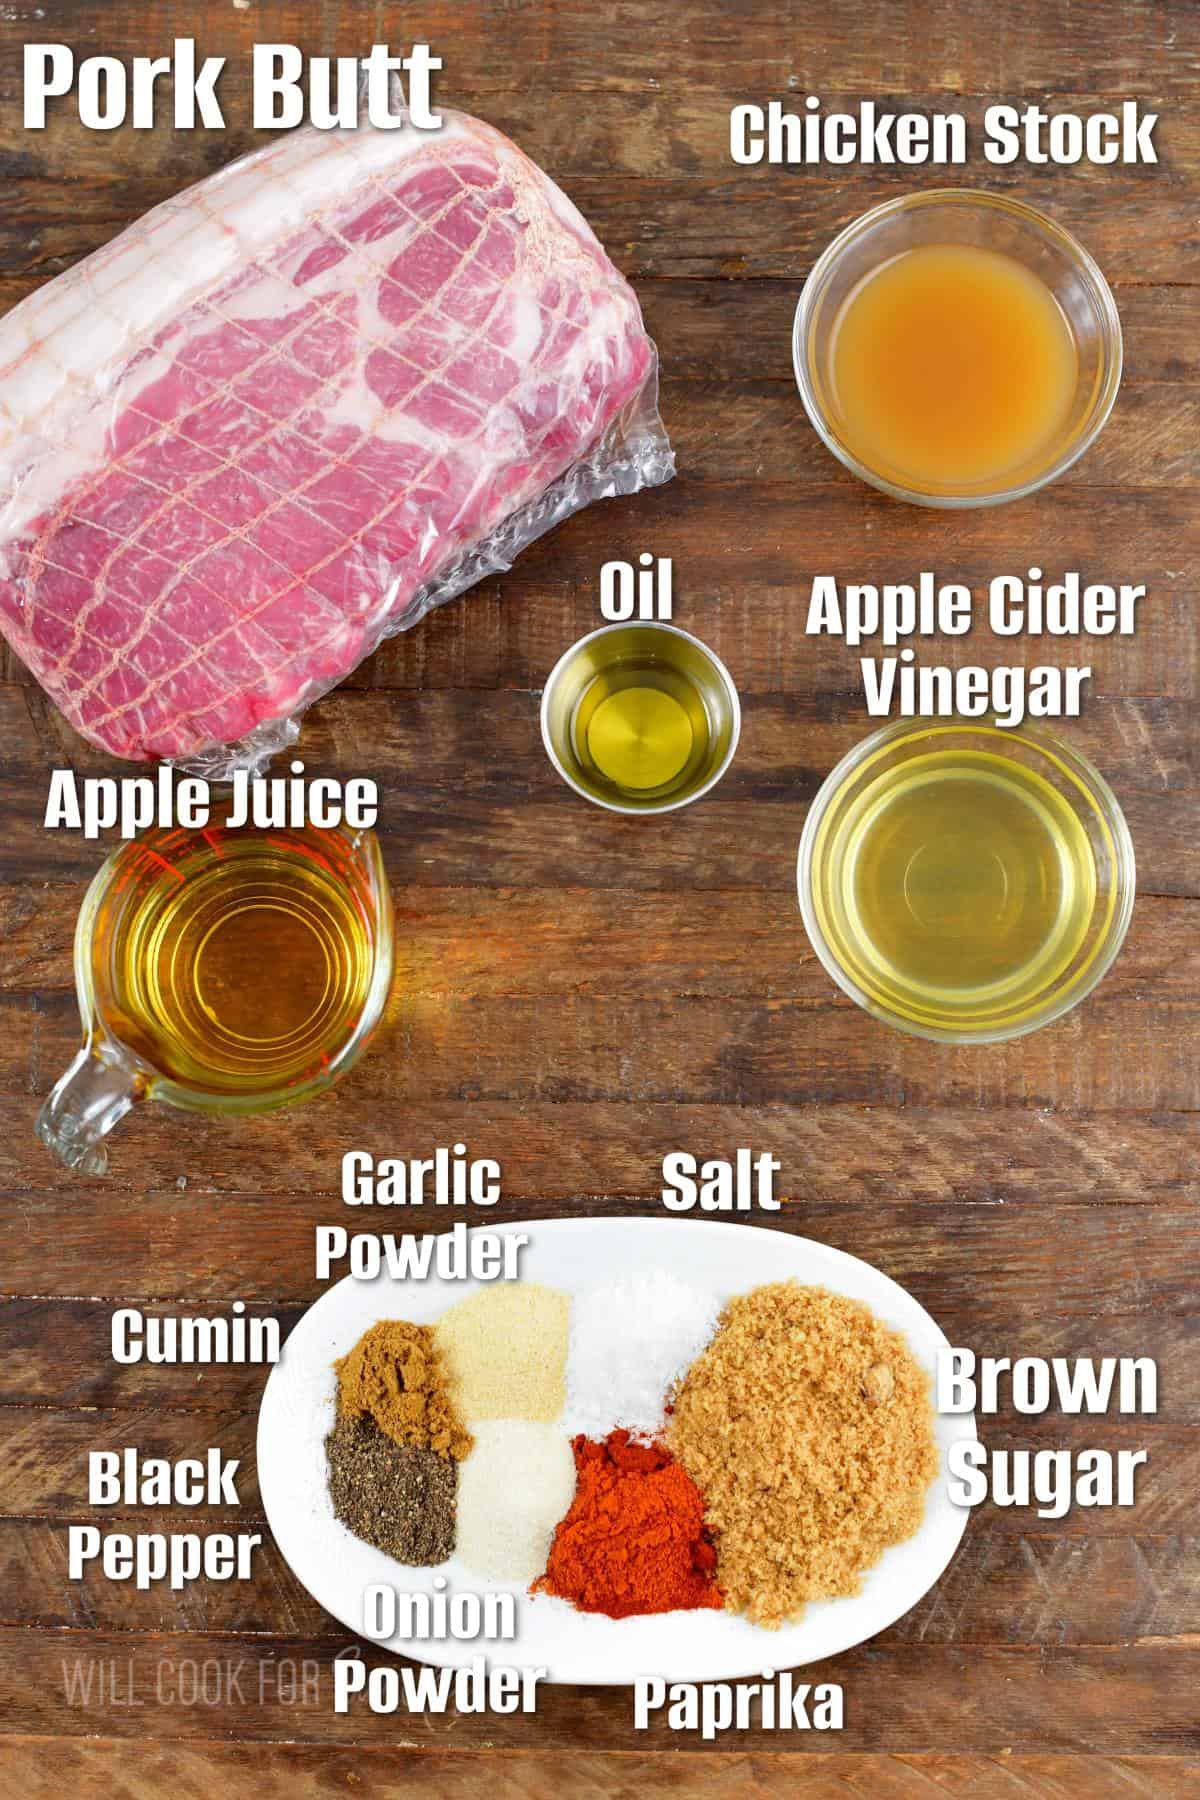 The ingredients for instant pot pulled pork are placed on a wooden surface.